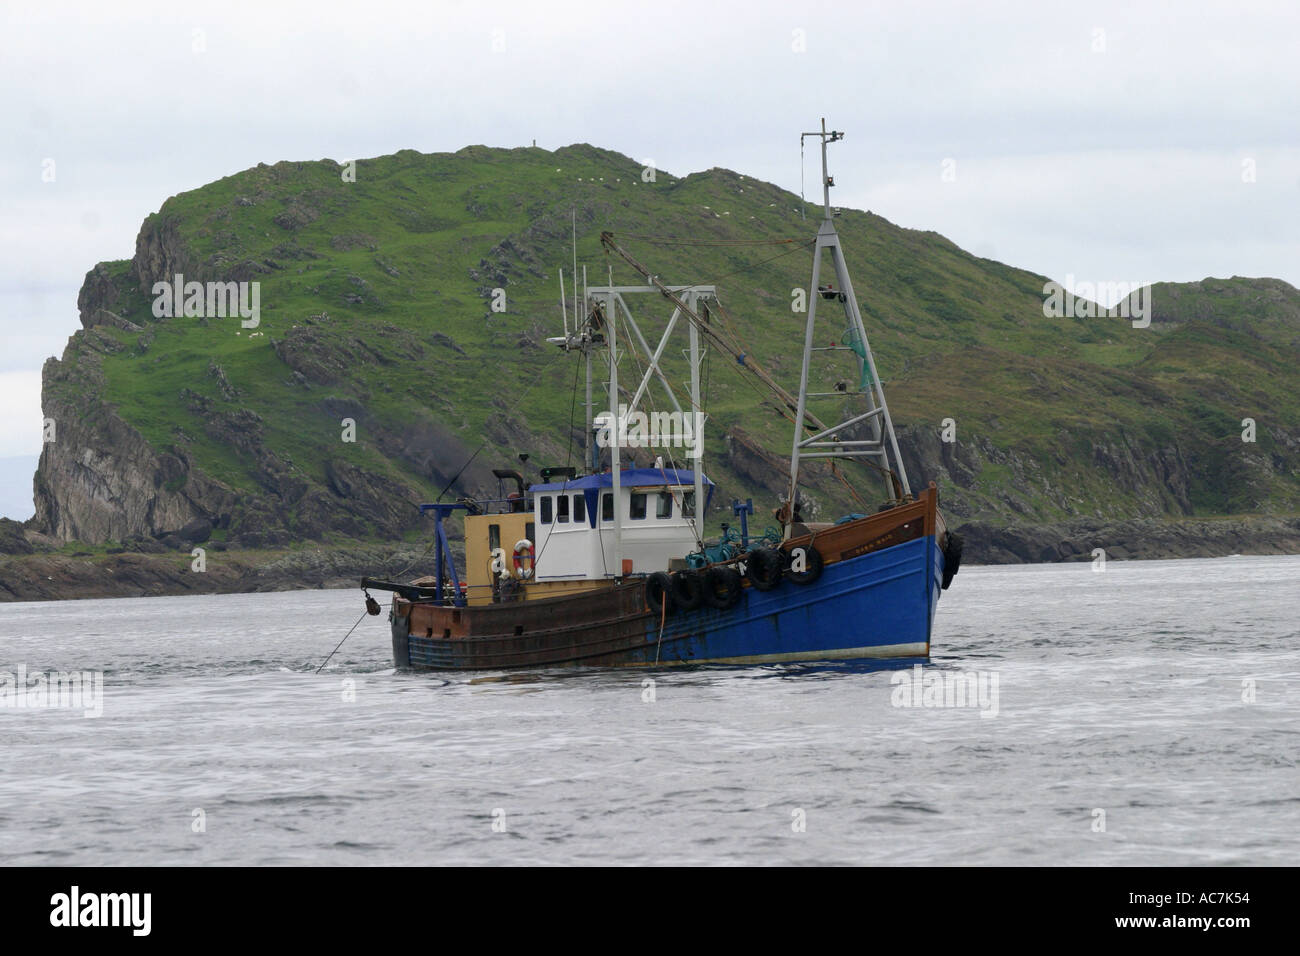 Scallop dredging boat operating in the Firth of Lorne SAC off Scotlands West coast Stock Photo